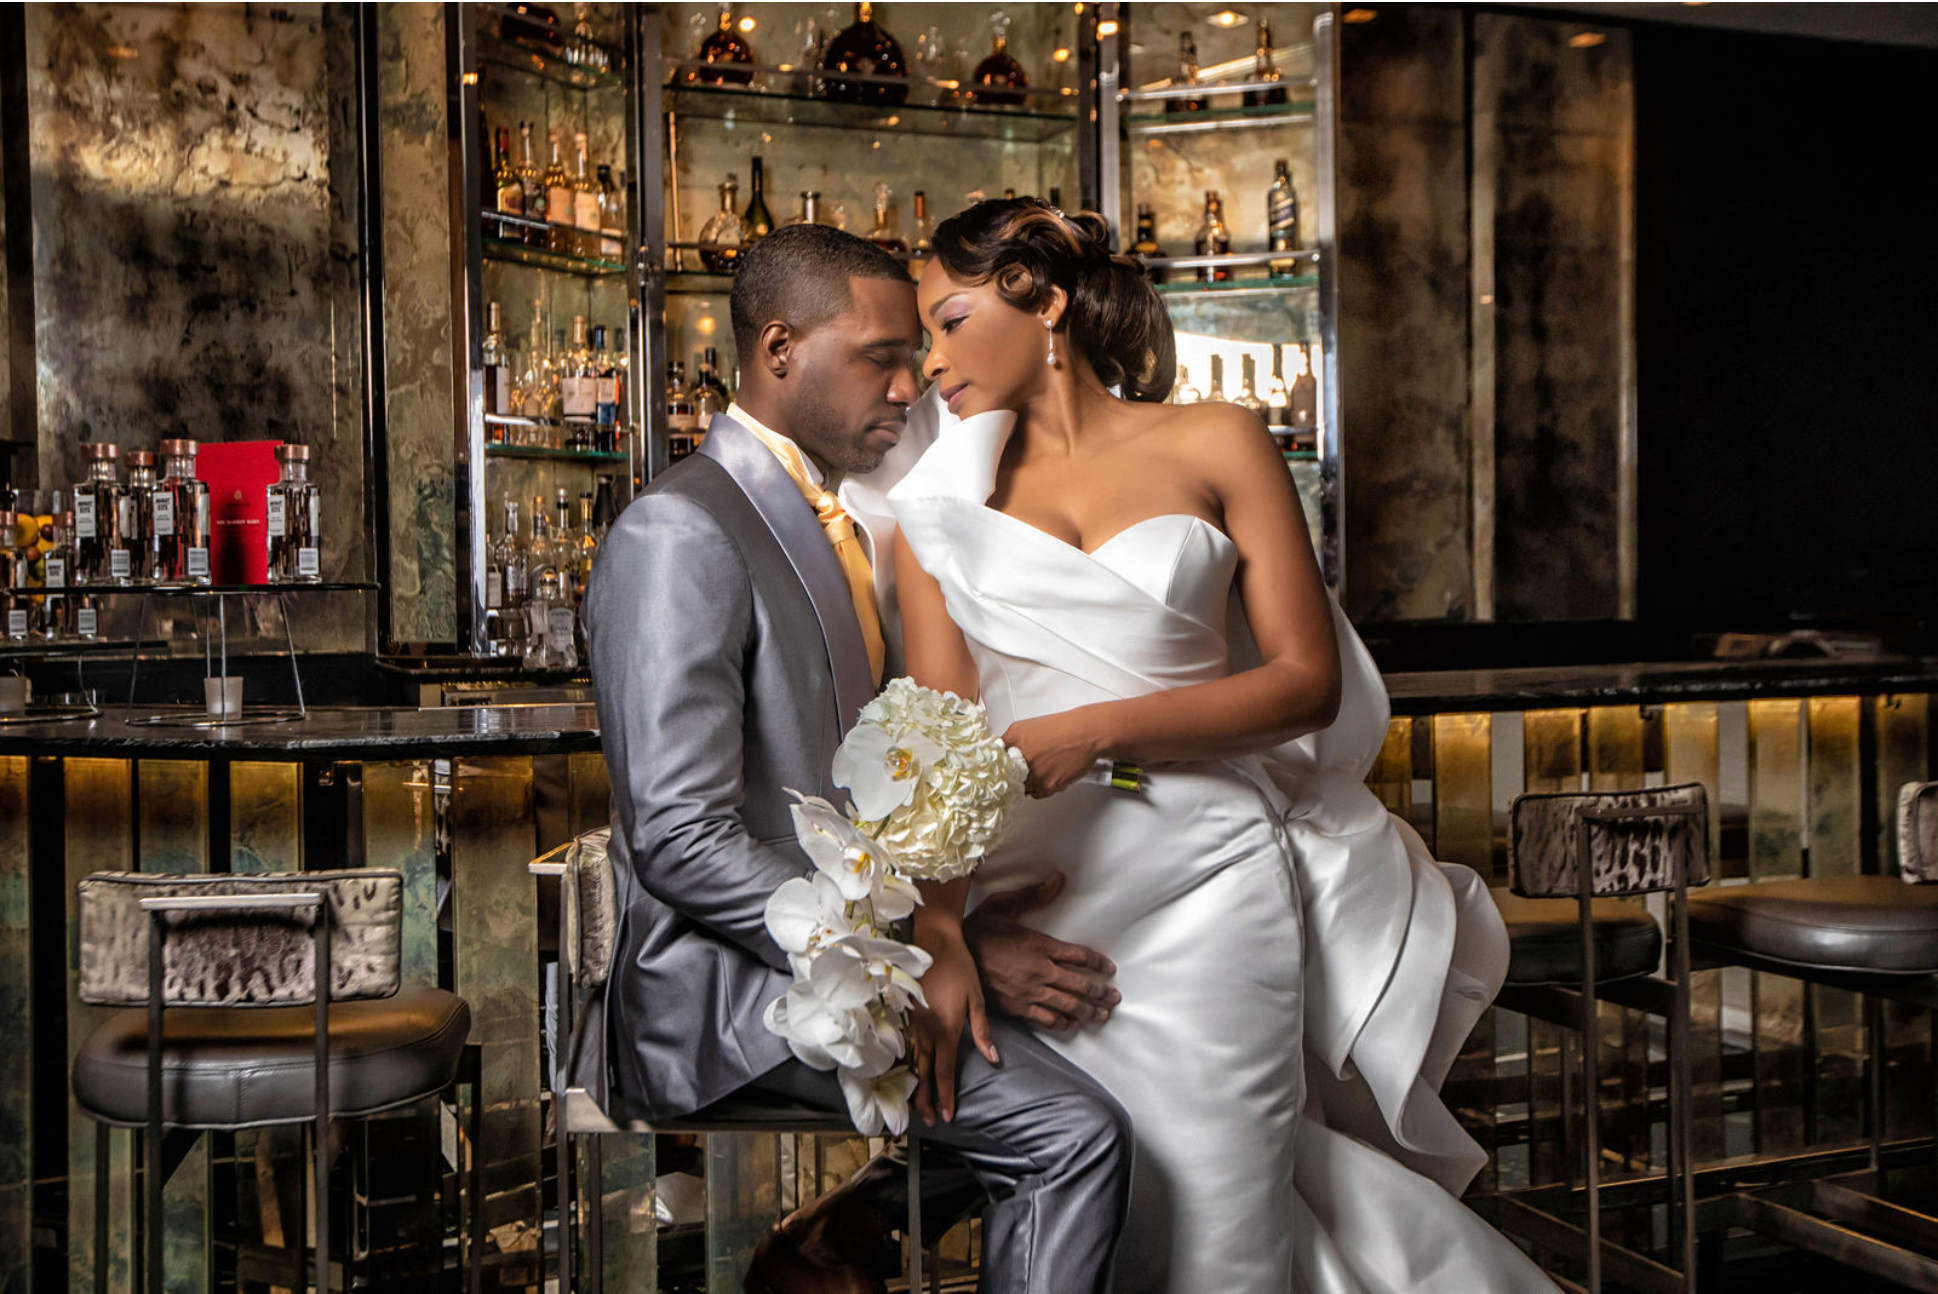 Bridal Bliss: Madeliene's Couture Wedding Dress Almost Stopped Time